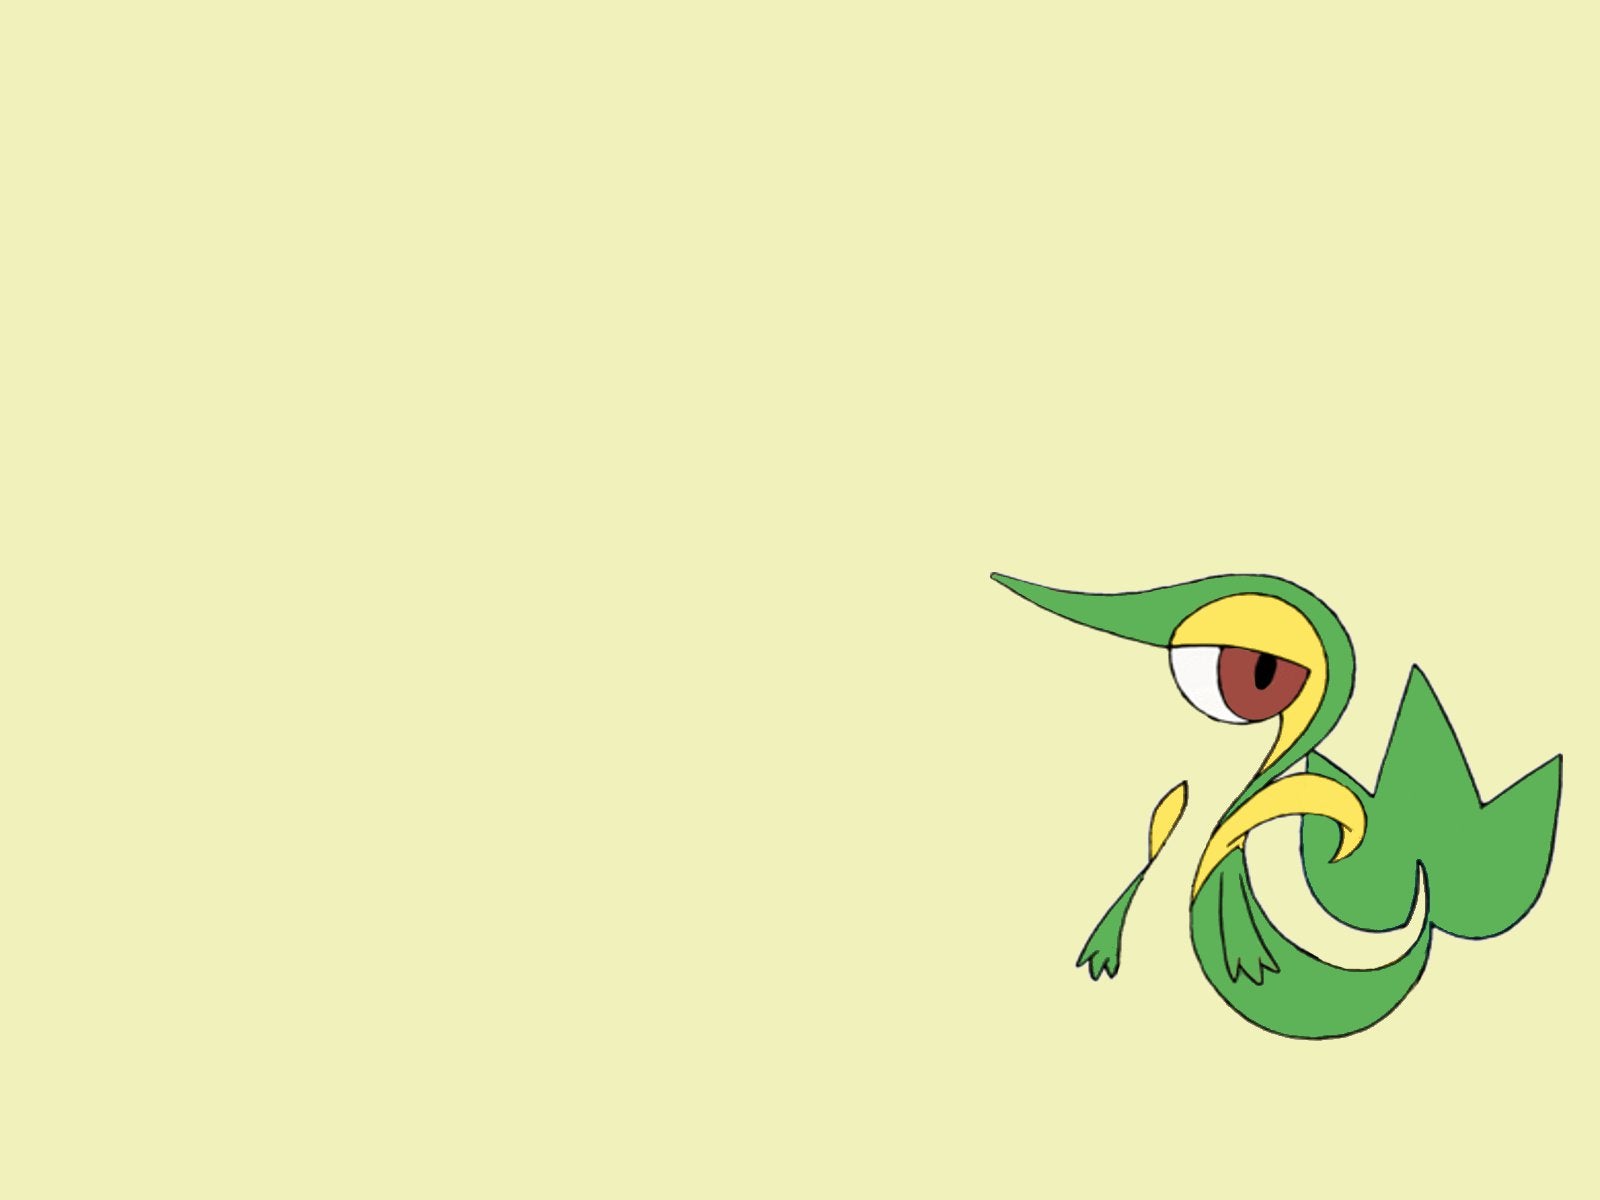 I Made the Gen 5 Starters Into Wallpaper I Hope You Guys Like Them